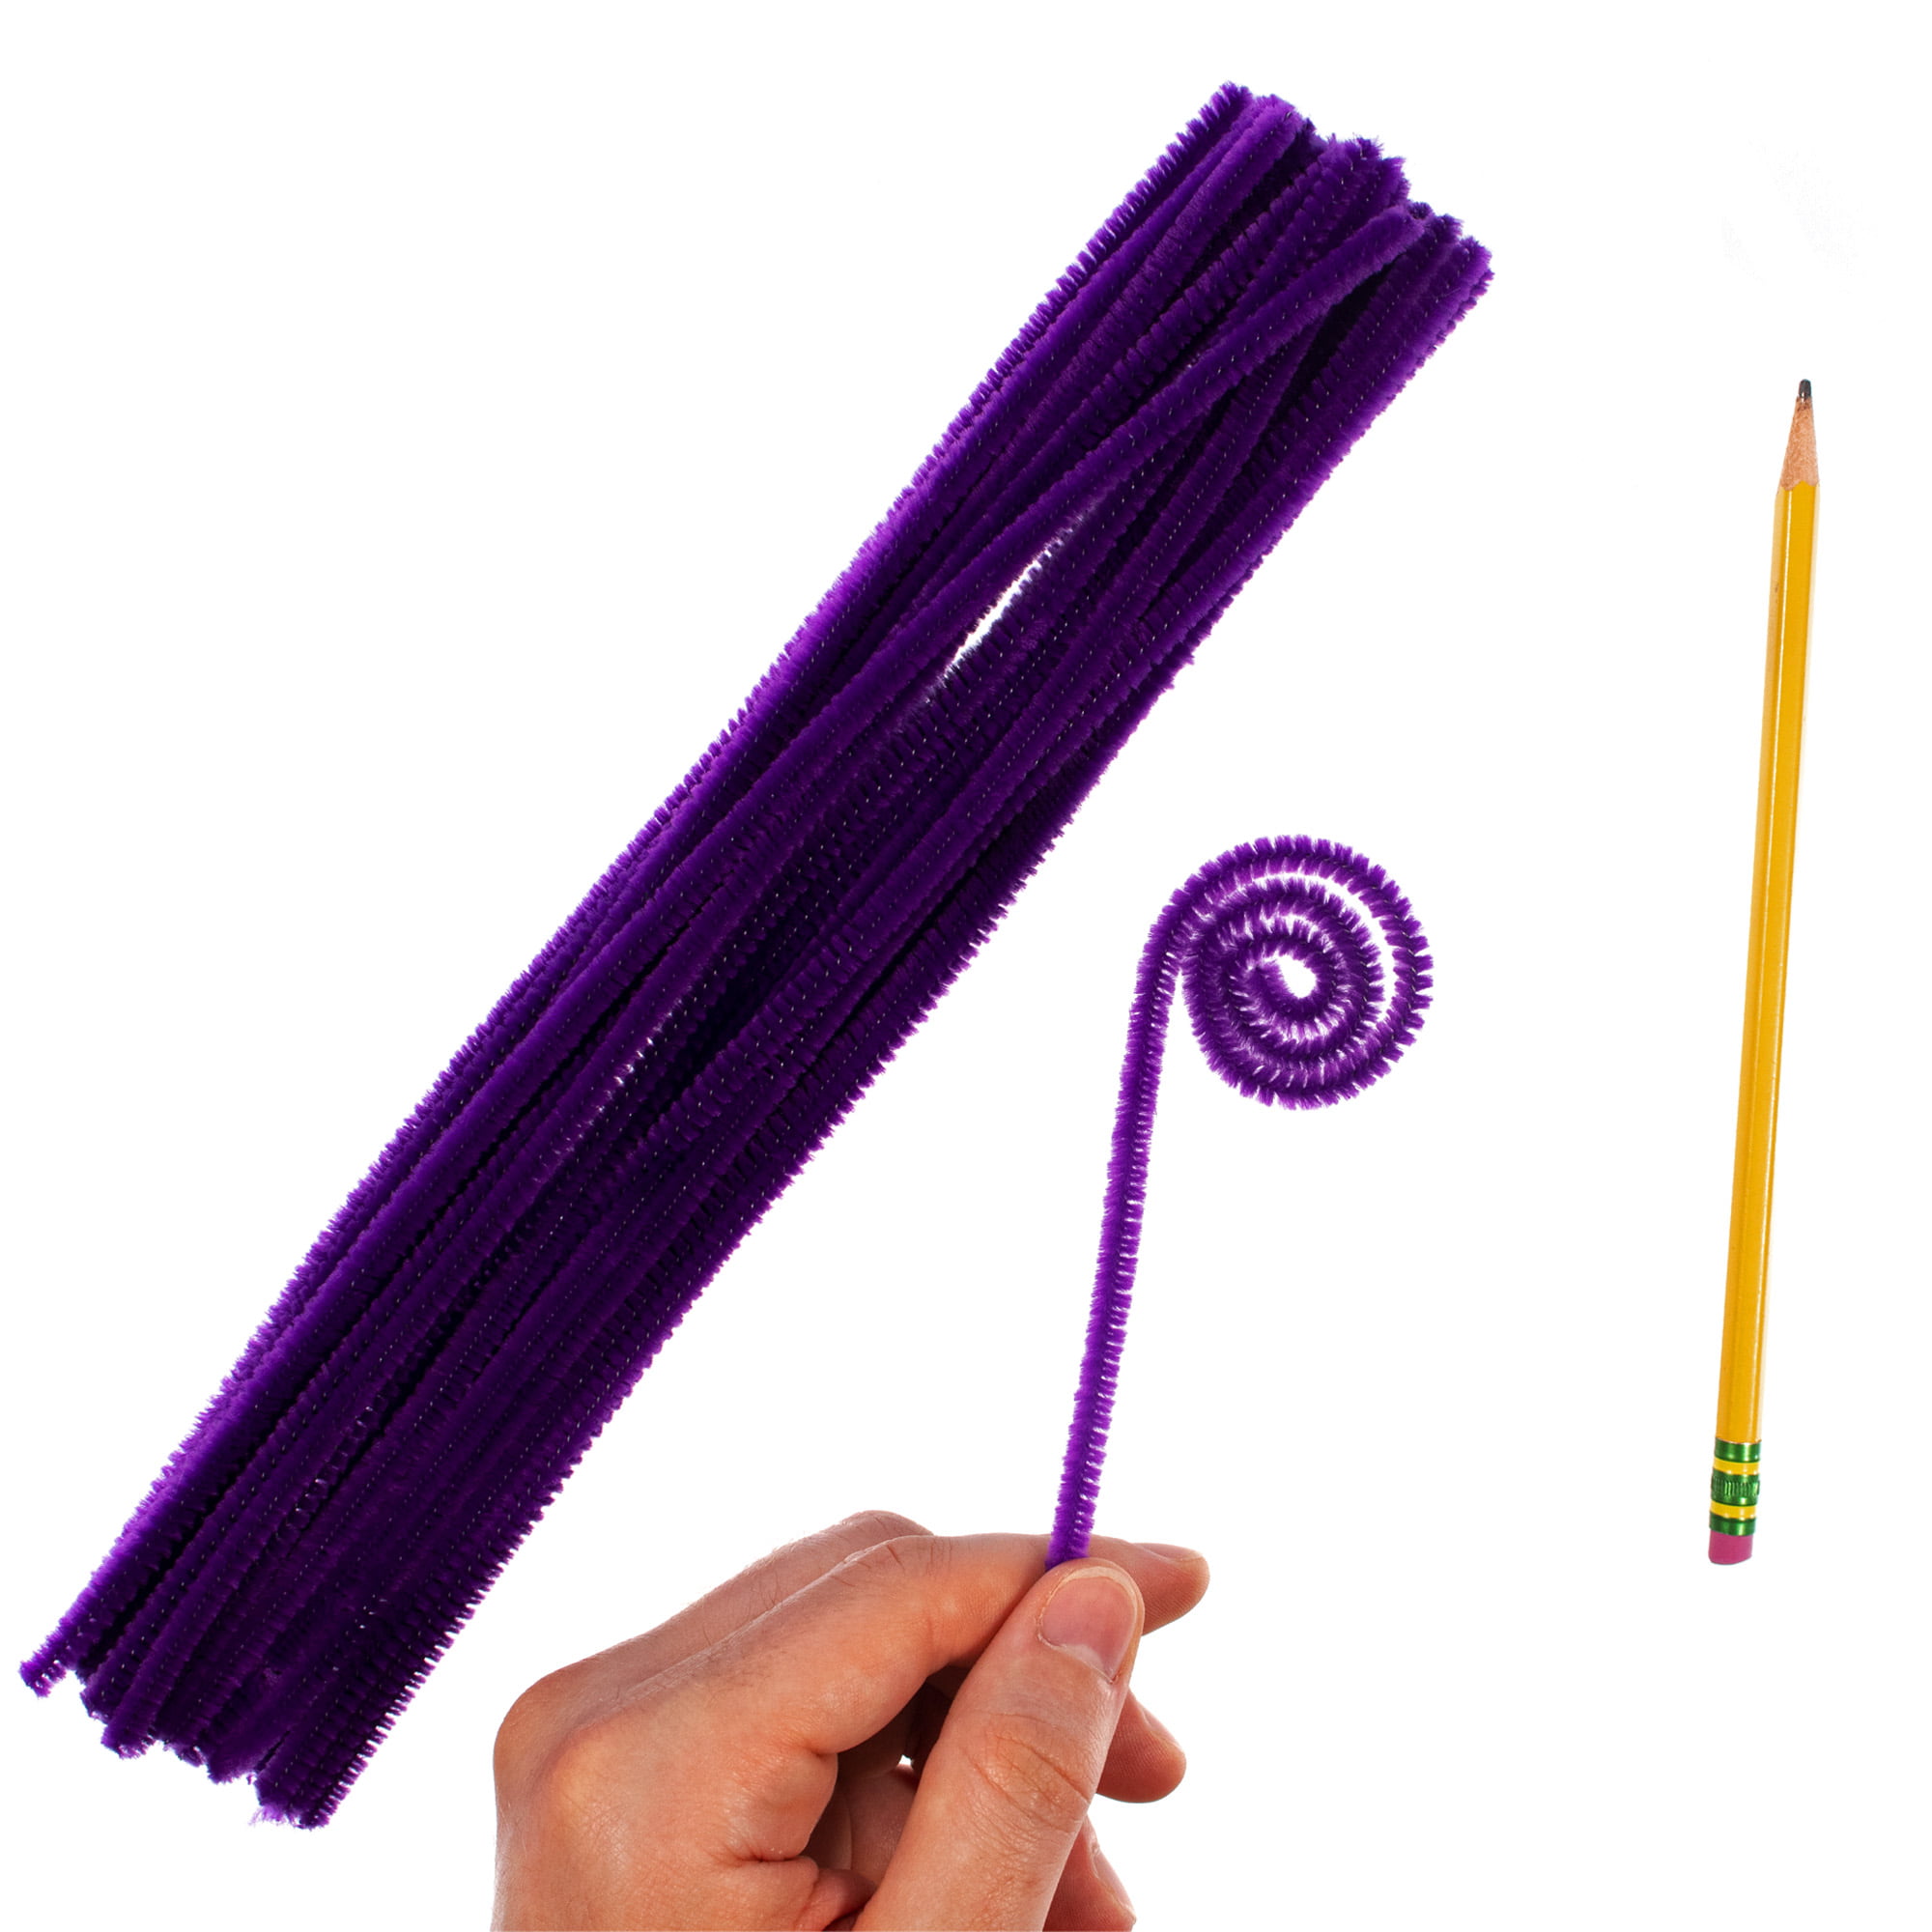 10, 20, 50 GIANT LARGE FLUFFY CHUNKY CRAFT PIPE CLEANERS STEMS 30CM / 12 x  12mm